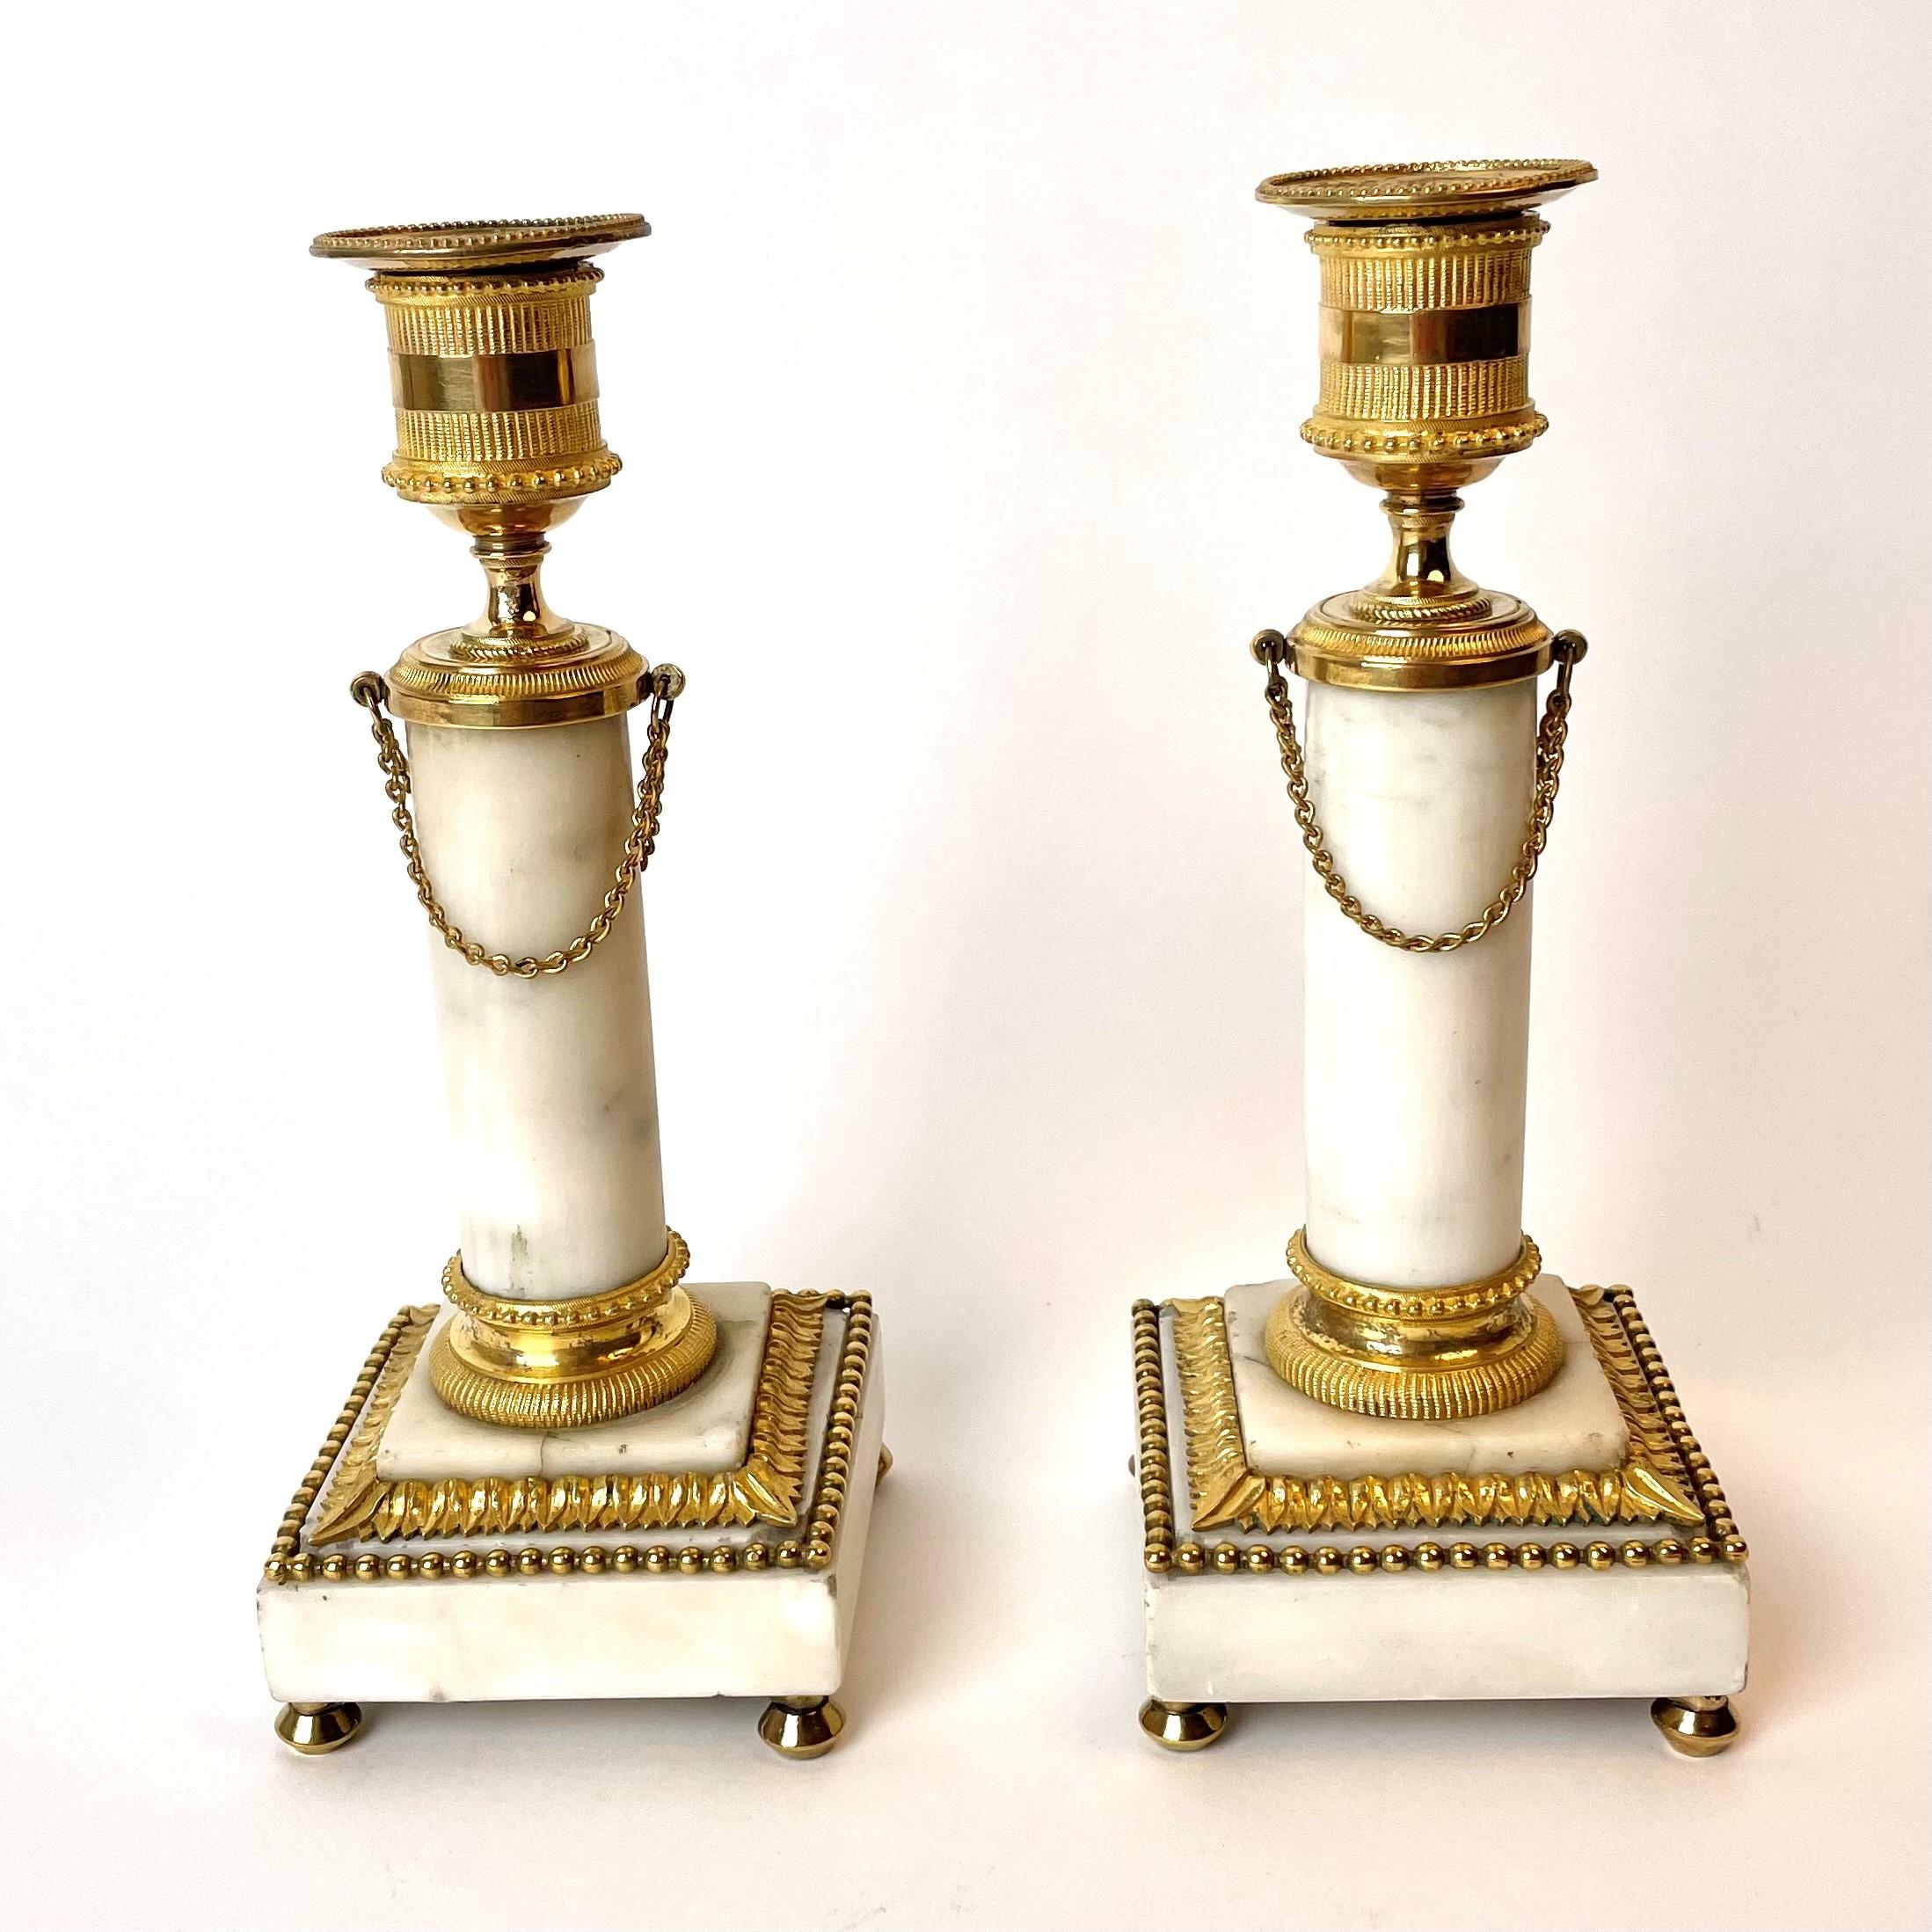 Louis XVI Pair Sophisticated Carrara Marble and Gilt Bronze Candlesticks from the 1780s For Sale